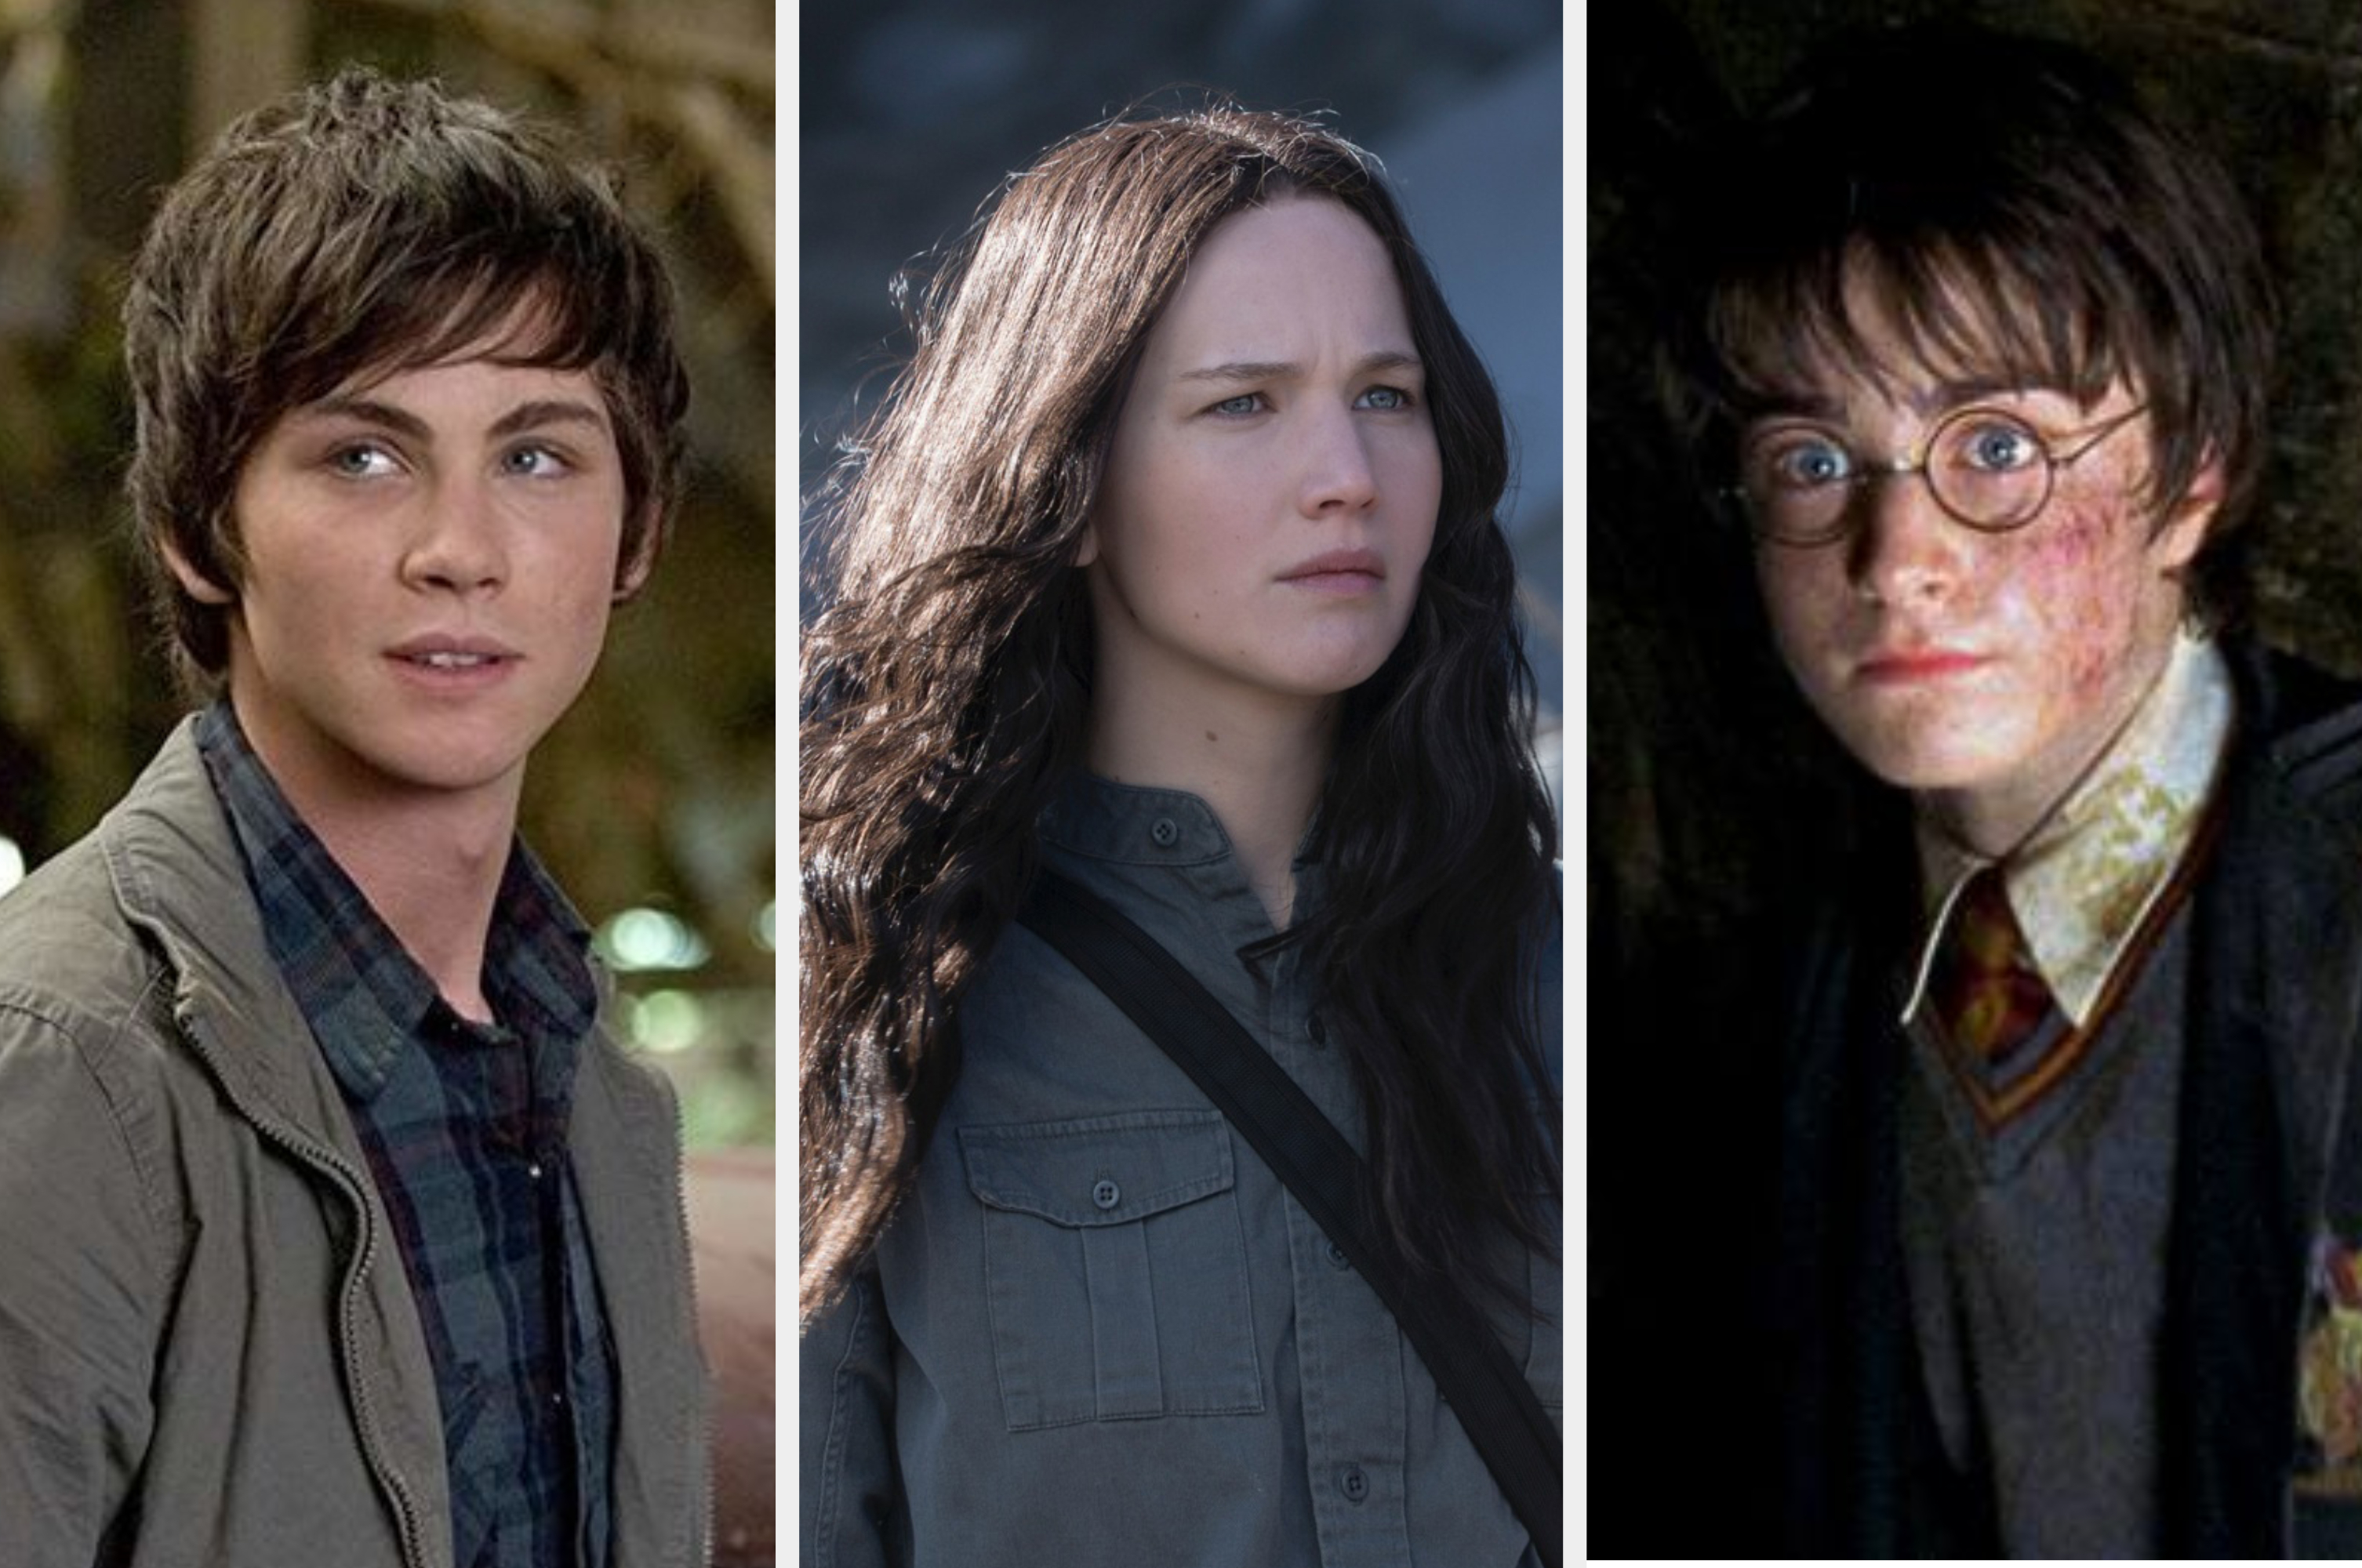 From left to right, Percy Jackson, Katniss Everdeen, and Harry Potter.